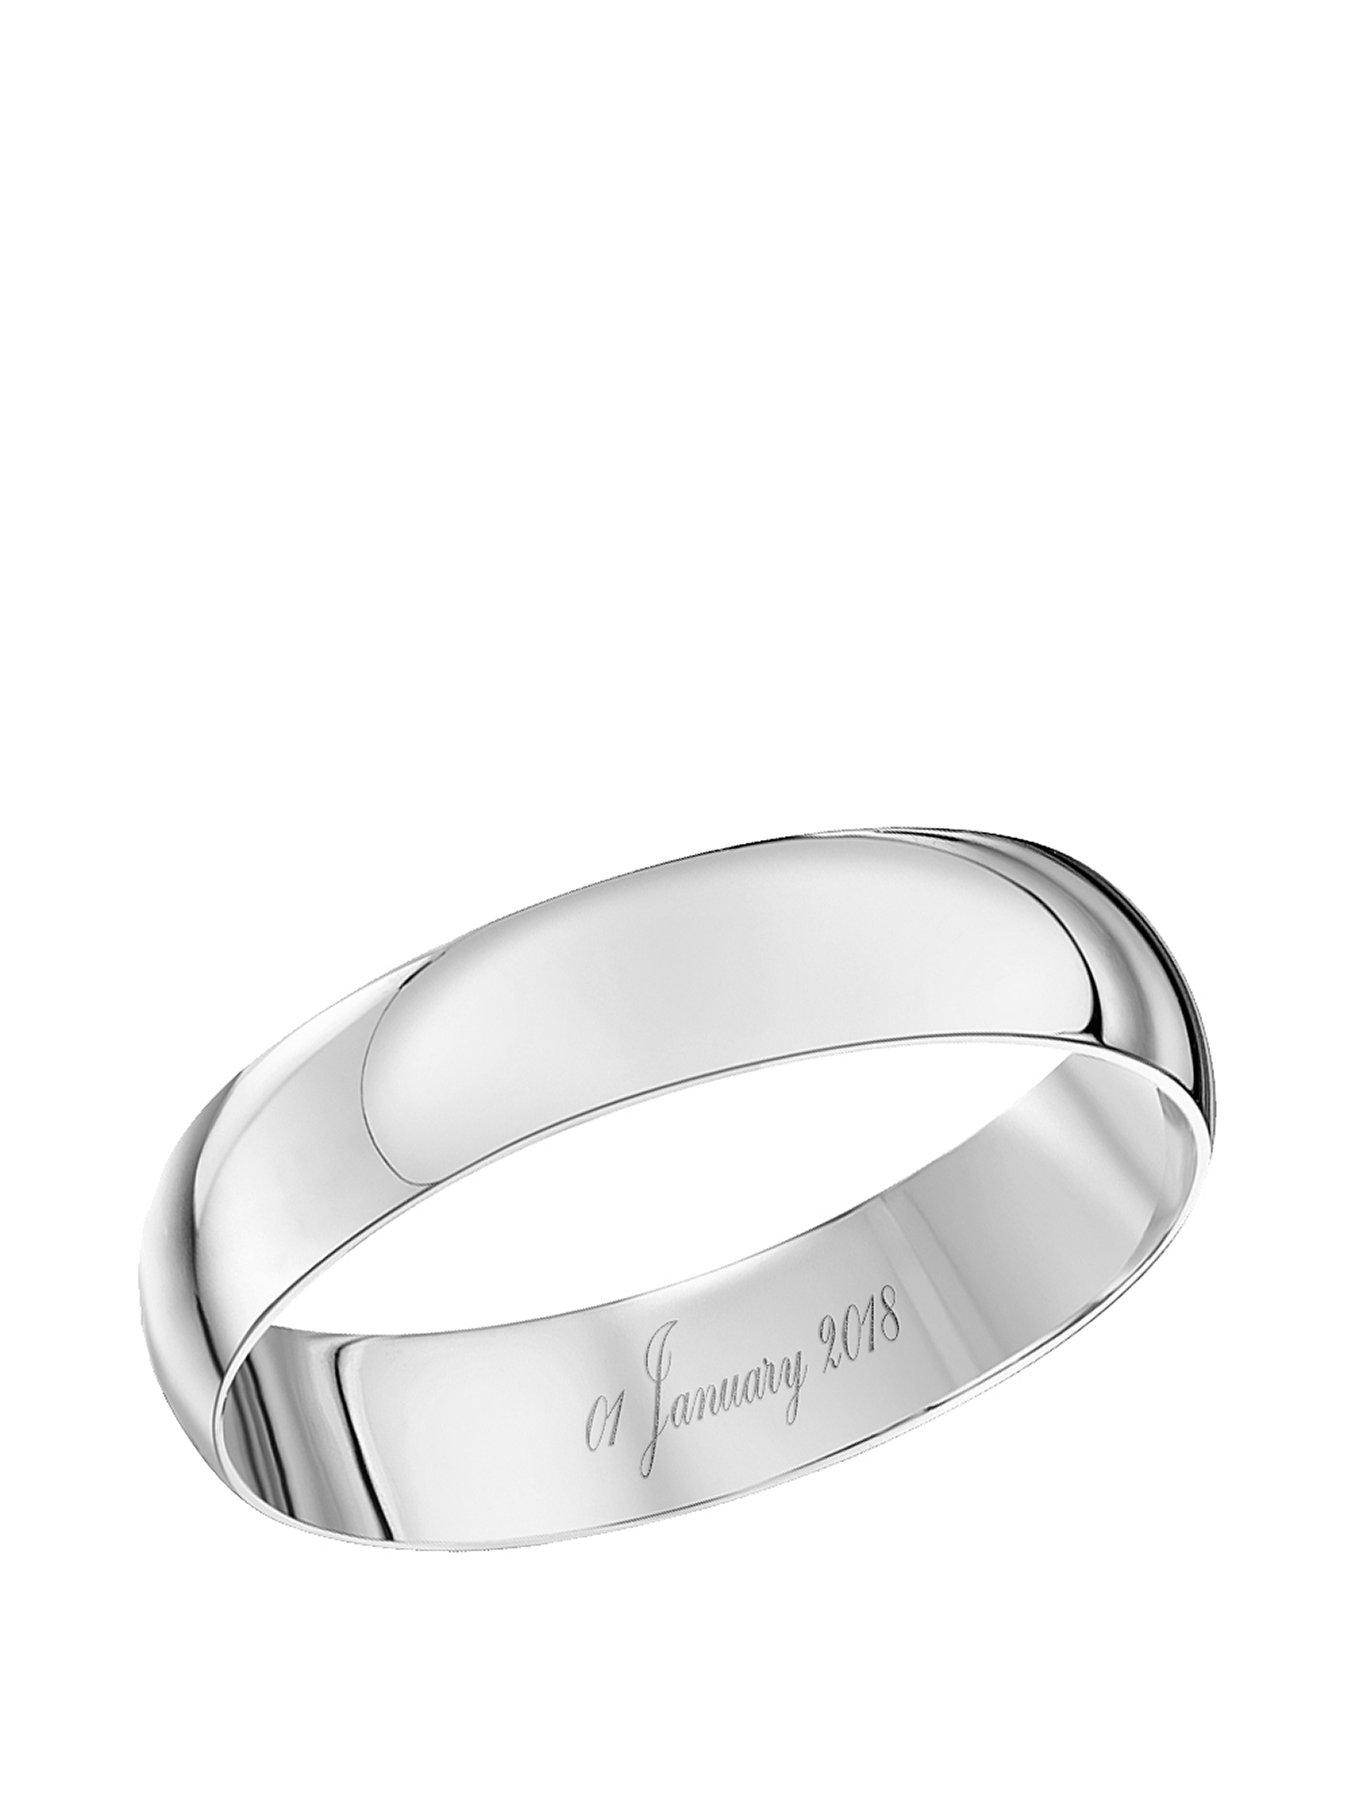 Sterling Silver Secret of Love Five Metals Ring